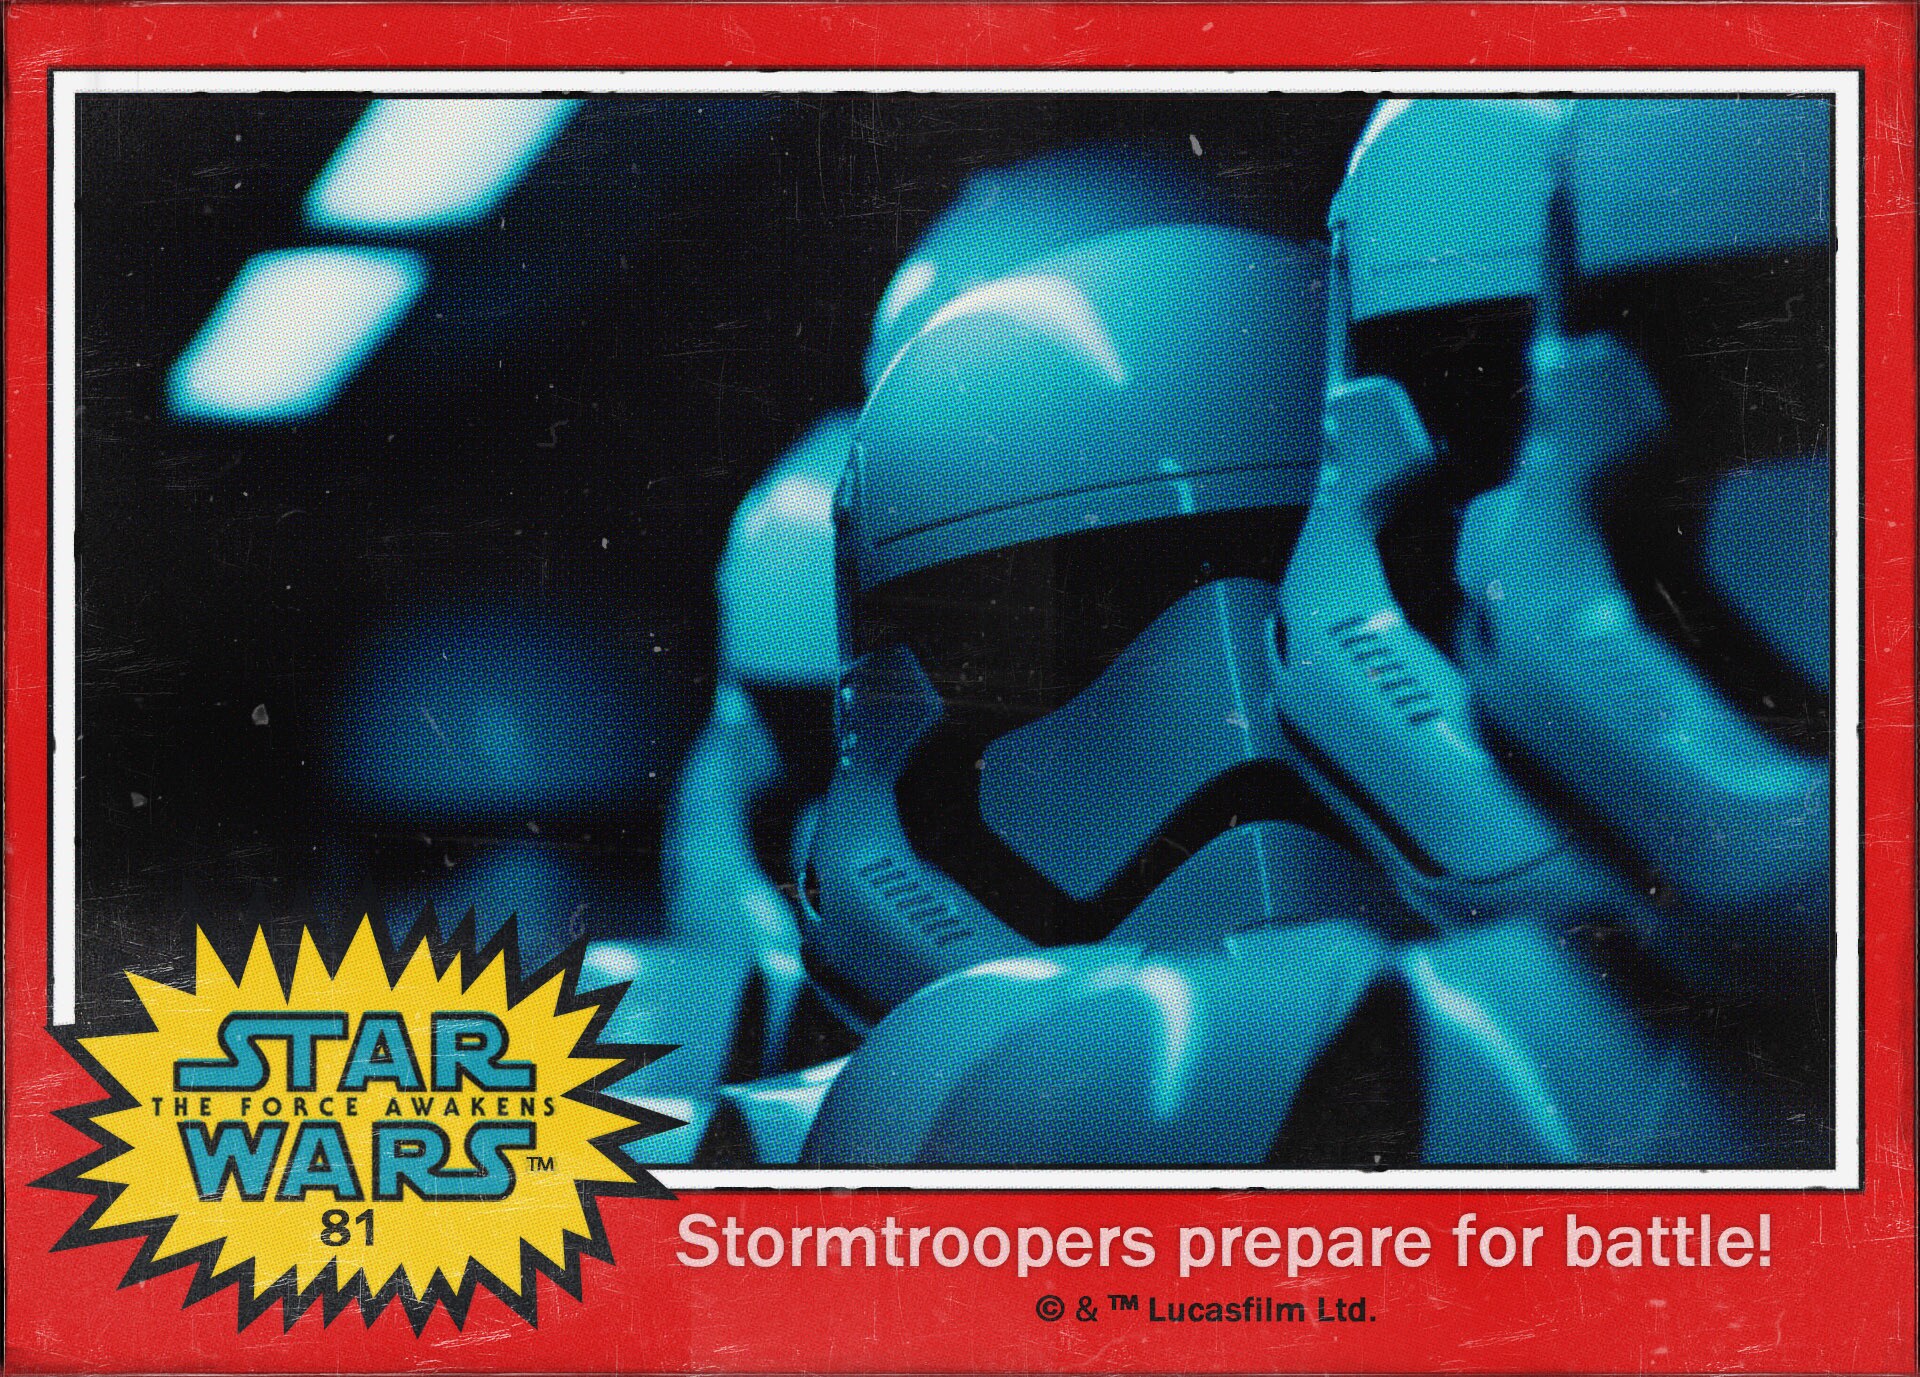 Stormtroopers prepare for battle! Star Wars: The Force Awakens Digital Trading Card #81